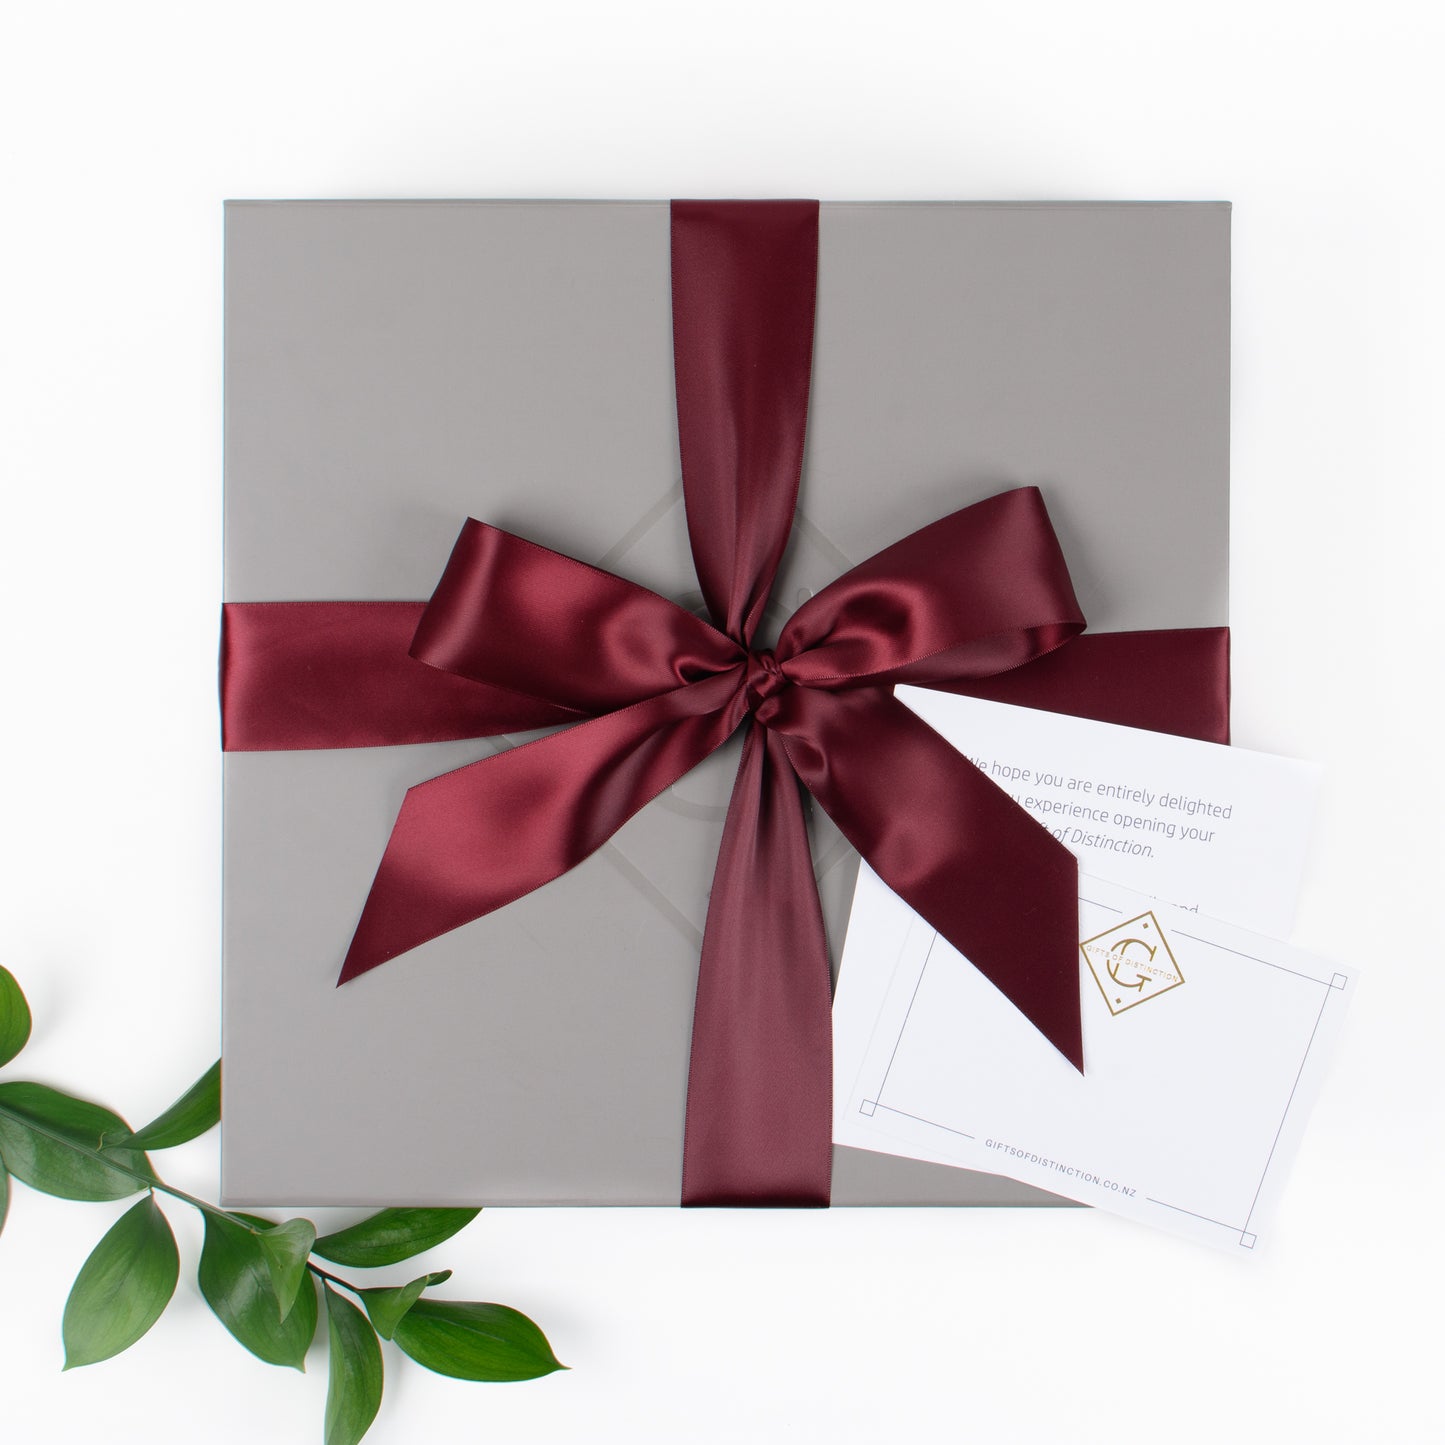 Select - Gift Boxes NZ - Gifts of Distinction